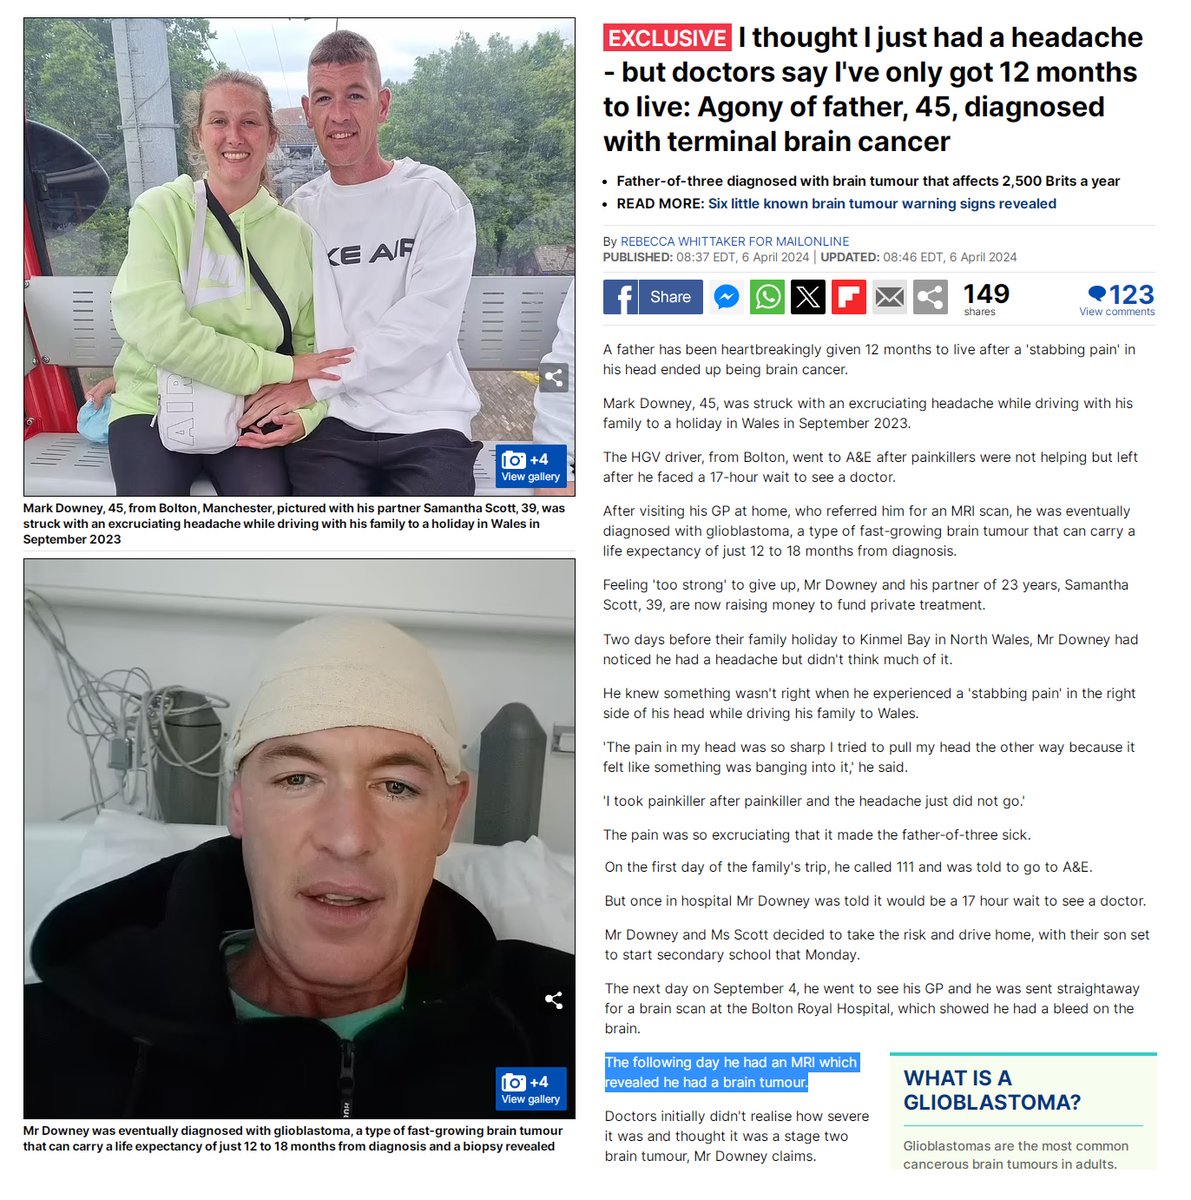 Manchester, UK - 45 year old Mark Downey had a headache while driving in Sep.2023

He was diagnosed with terminal glioblastoma.

COVID-19 mRNA Vaccine Induced Turbo Cancer cases are at an all time high.

Glioblastoma is 2nd most common mRNA Induced Turbo Cancer.

#DiedSuddenly